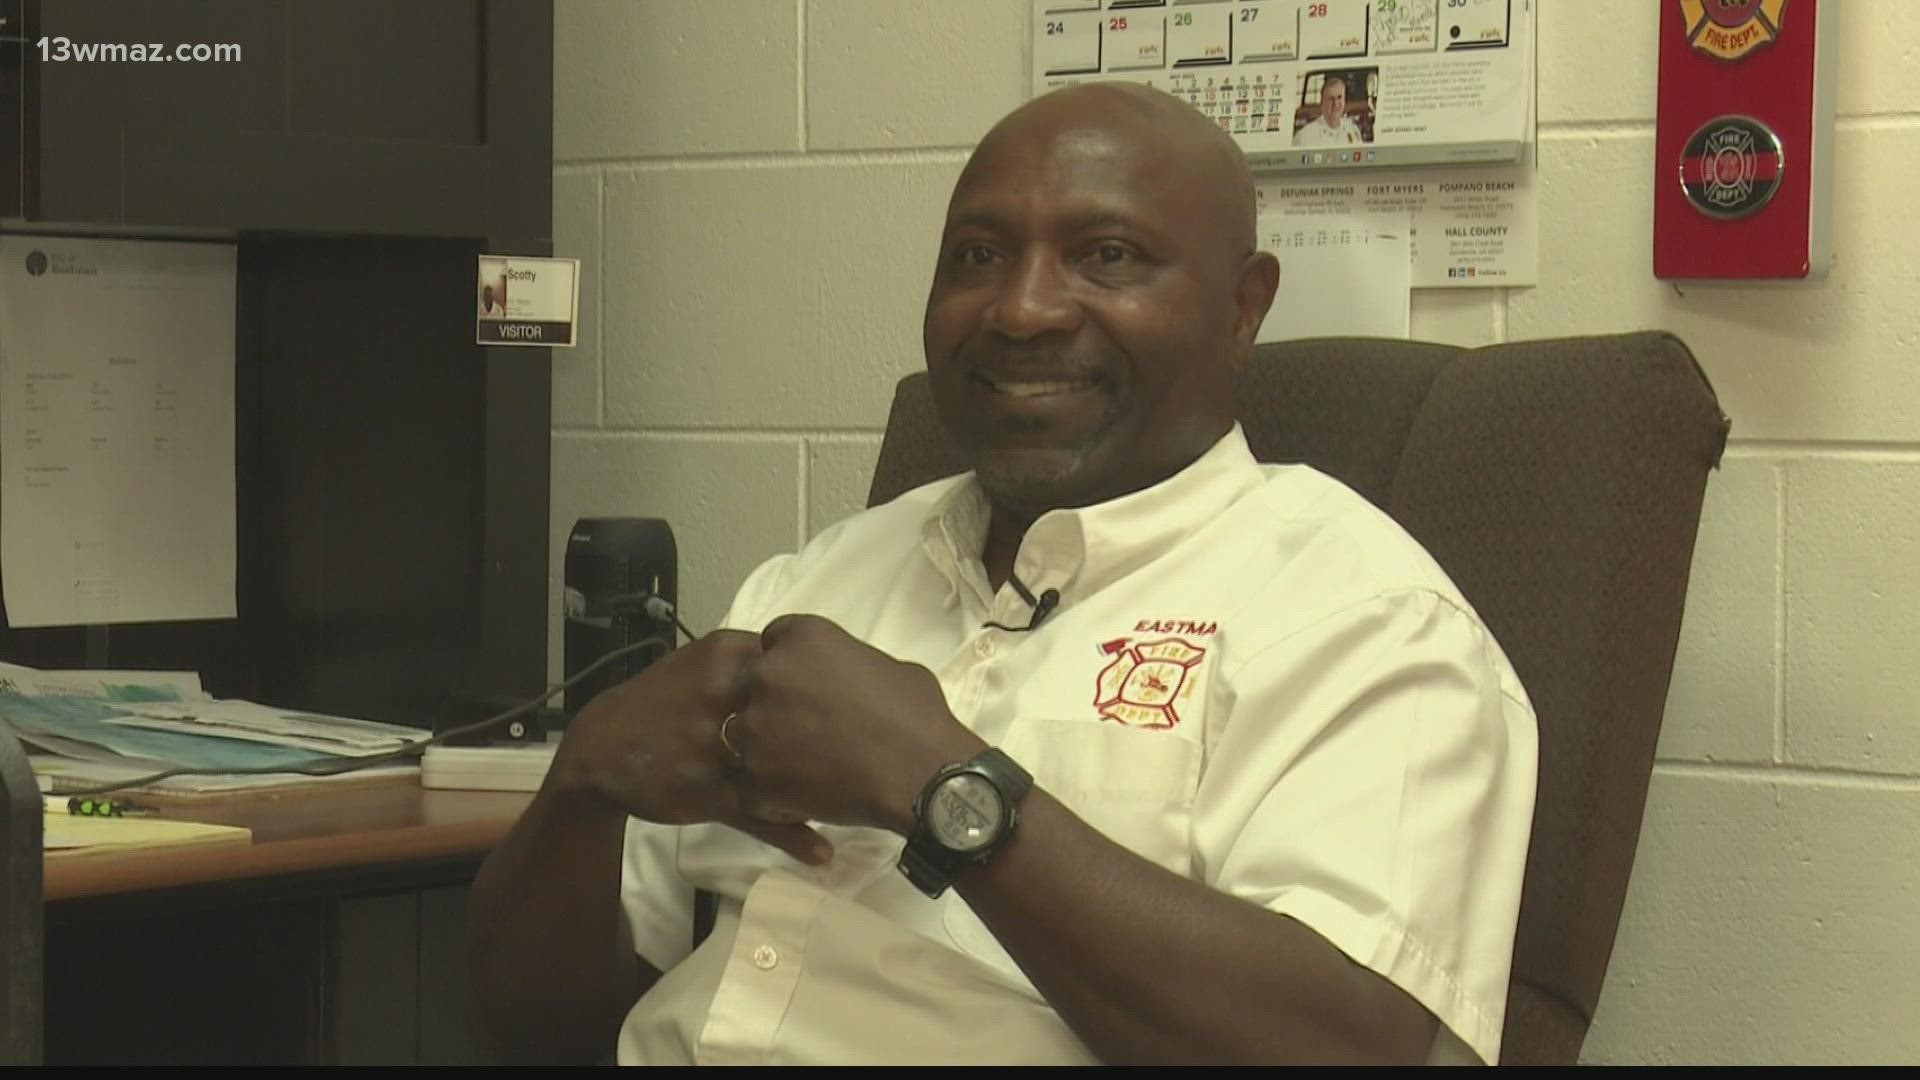 Scotty Whitten is coming up on his two-year anniversary as Eastman's first Black fire chief.